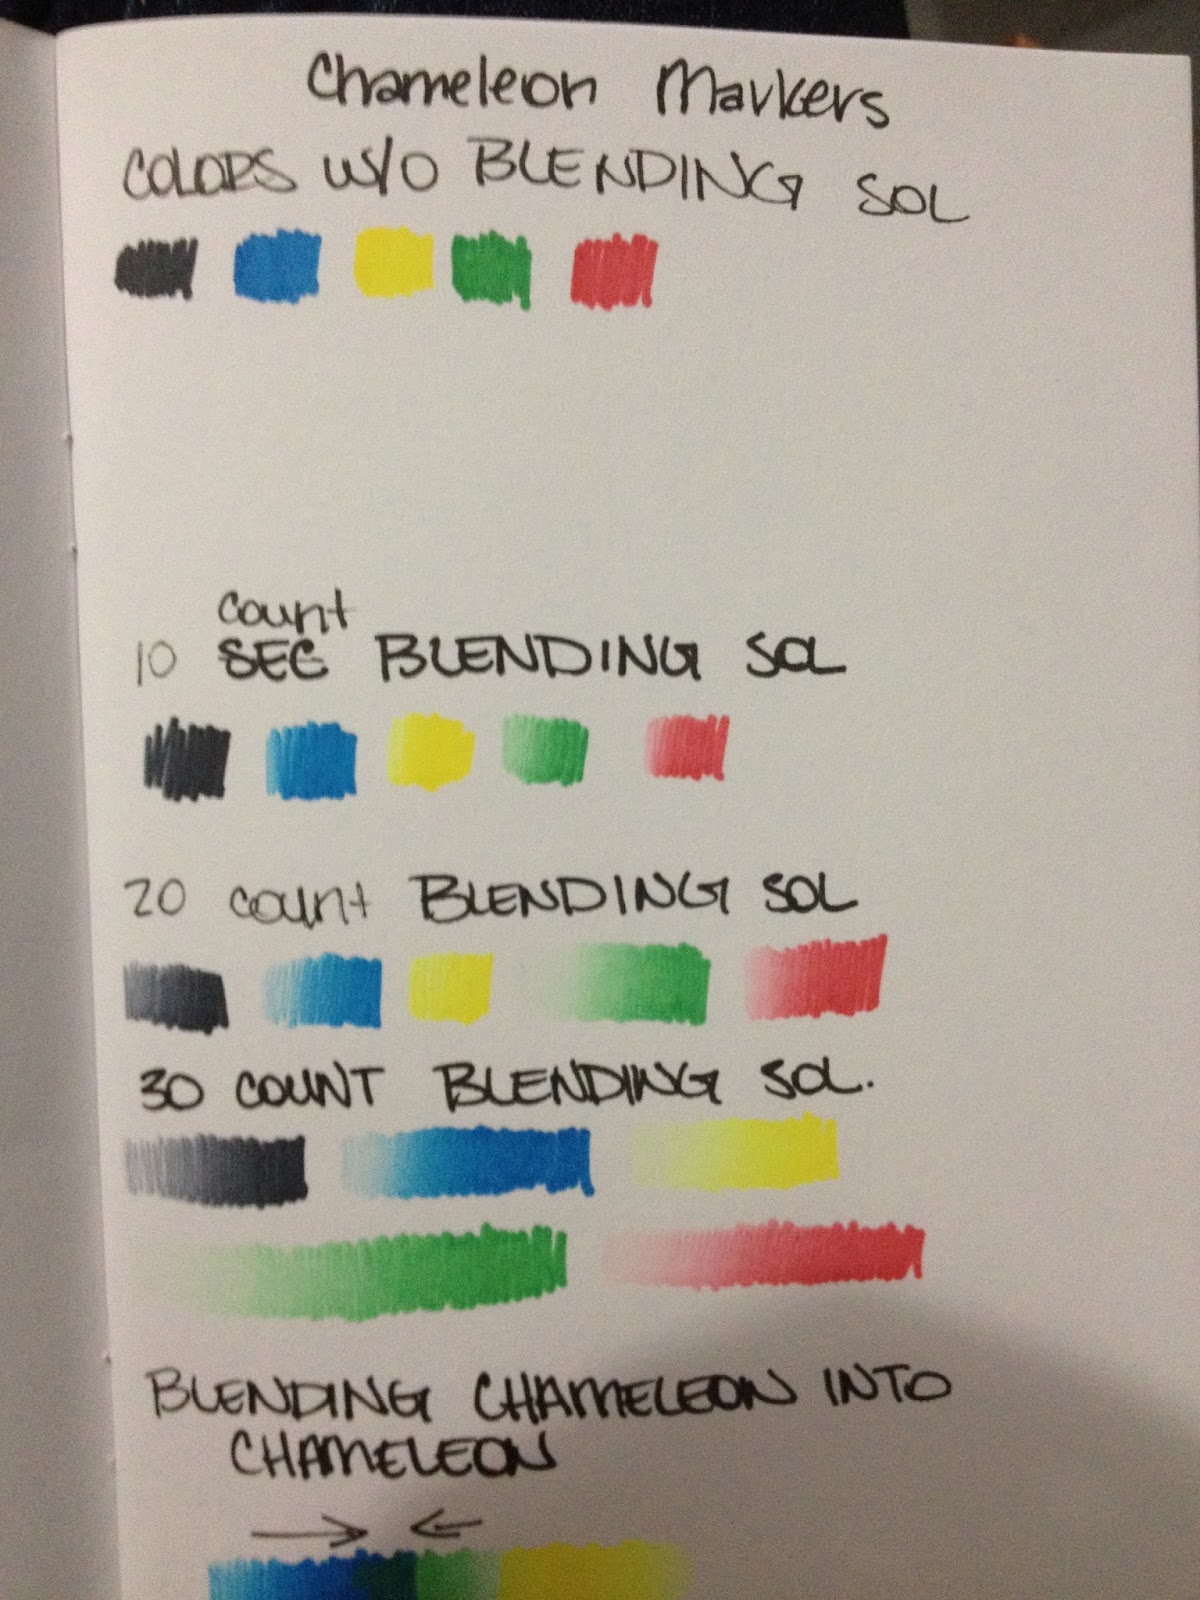 Comparing Chameleon Markers: Chameleon Vs Copic (and other alcohol markers)